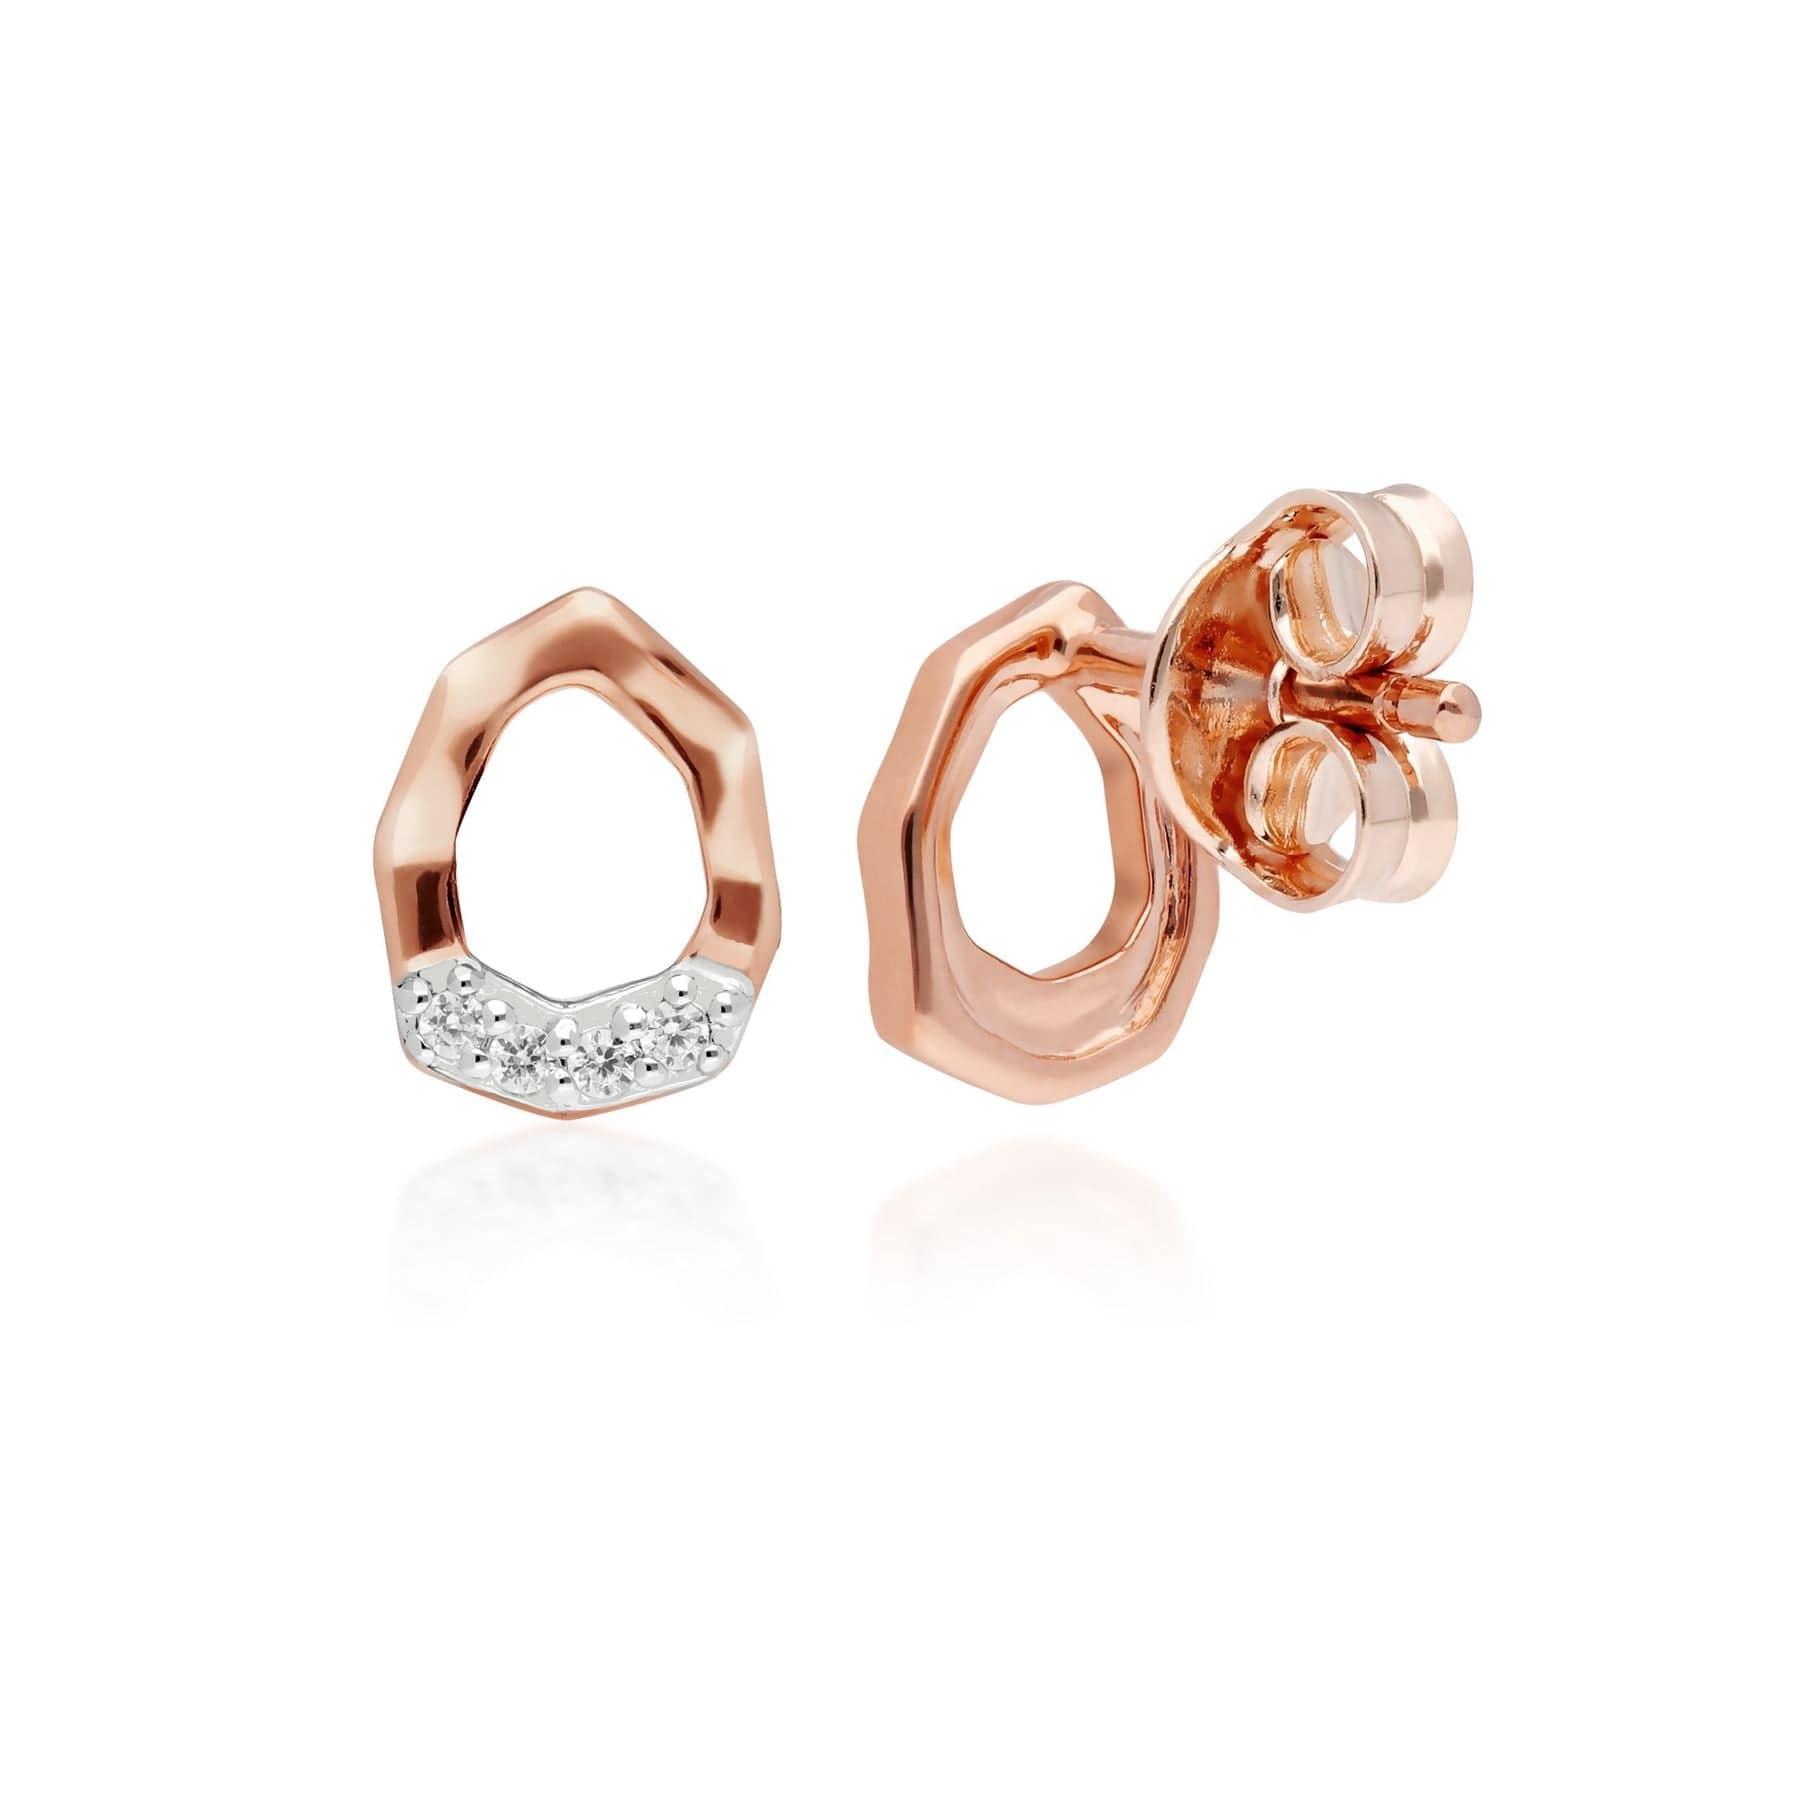 Diamond Pave Asymmetric Stud Earrings in 9ct Rose Gold